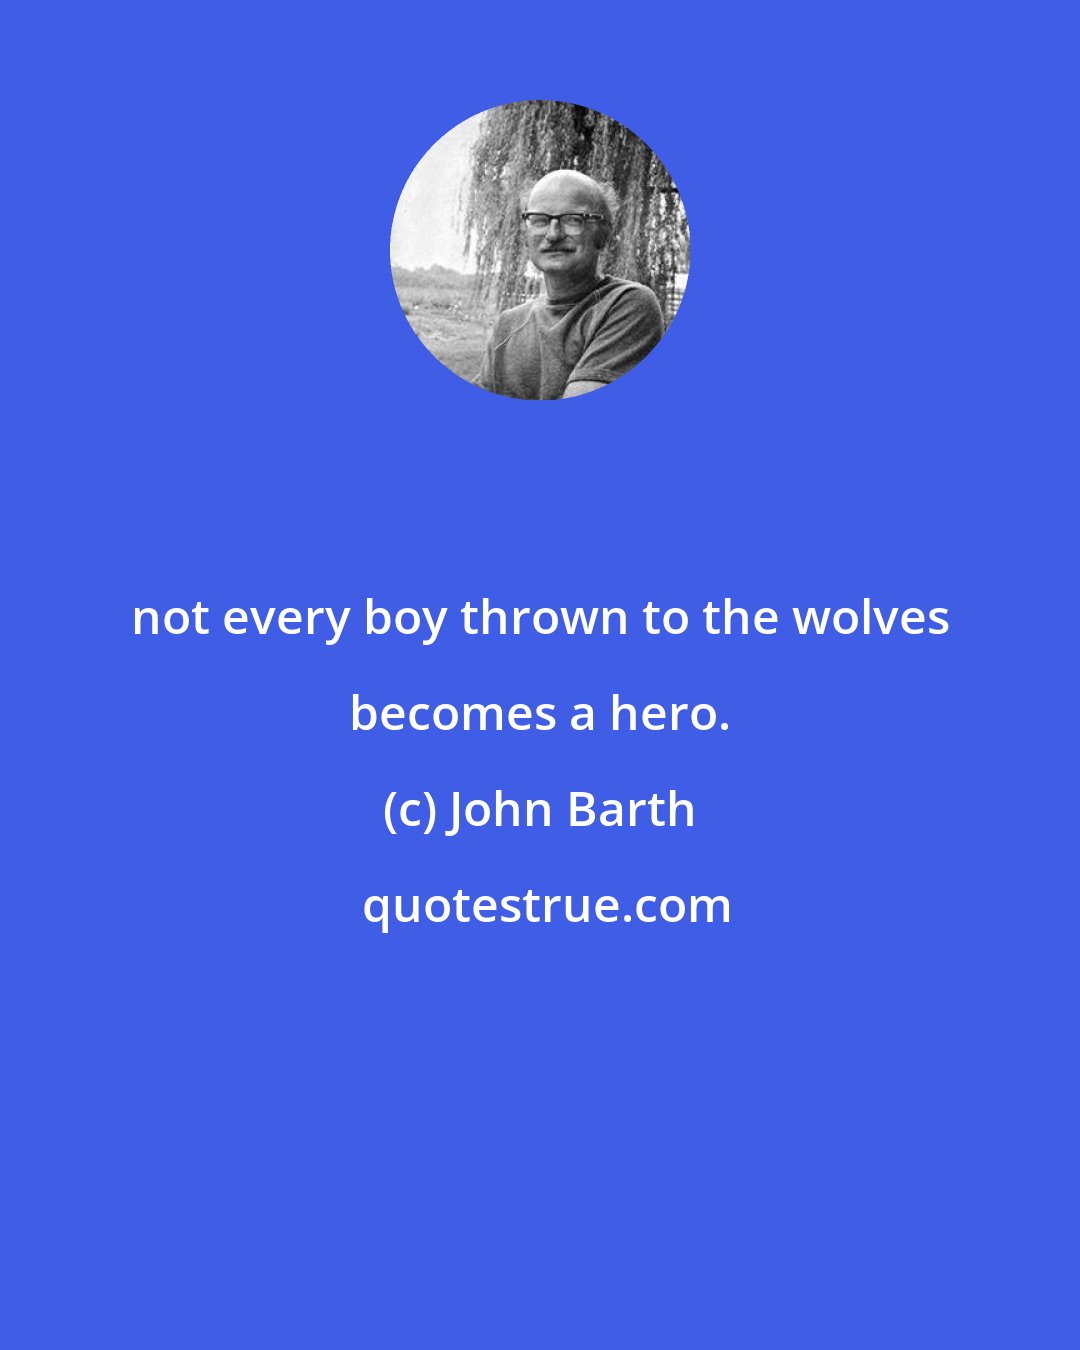 John Barth: not every boy thrown to the wolves becomes a hero.